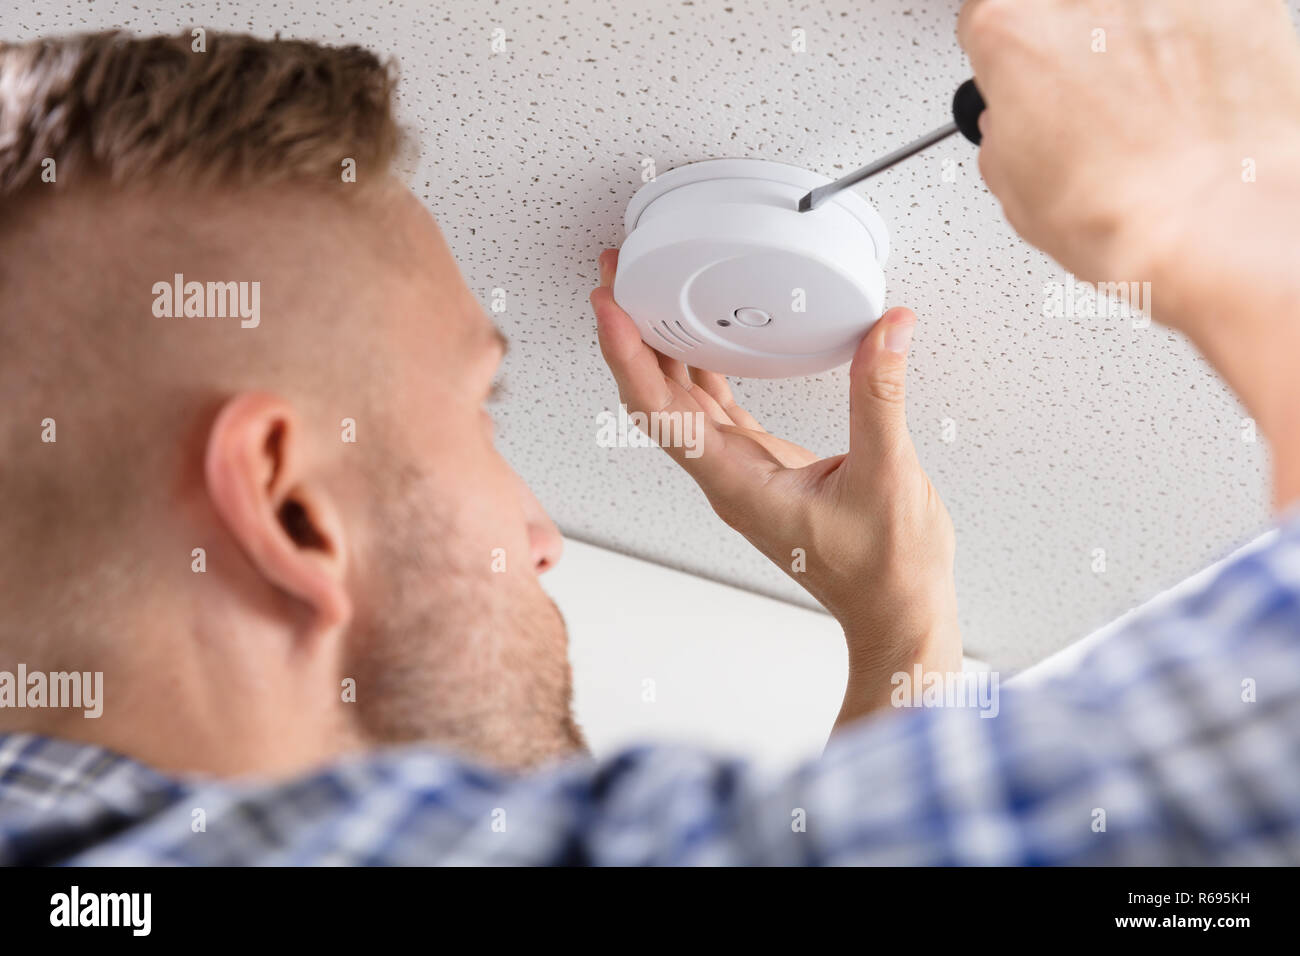 Person's Hand Using Screwdriver To Install Smoke Detector Stock Photo